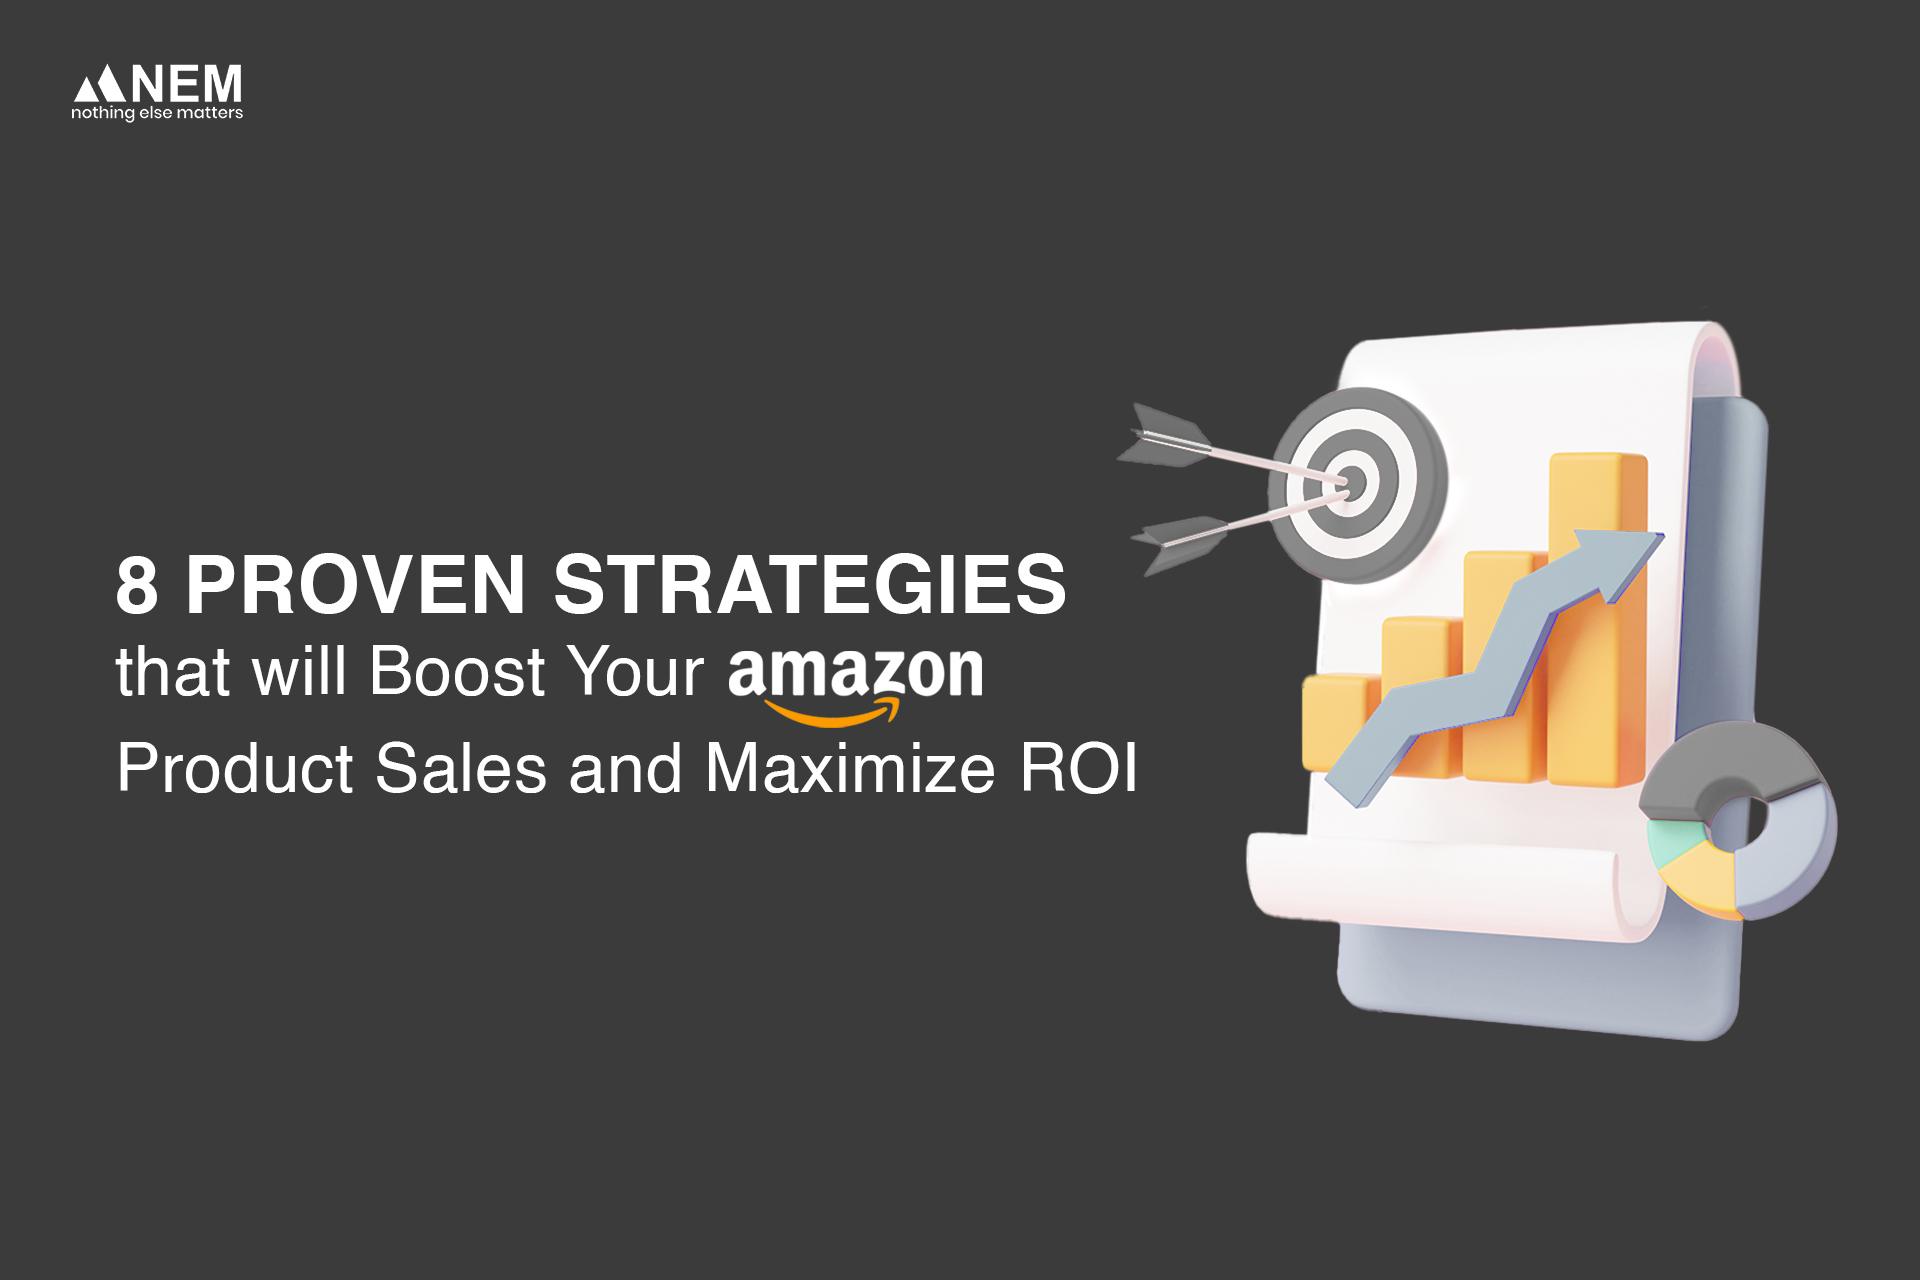 8 Proven Strategies that will Boost Your Amazon Product Sales and Maximize ROI